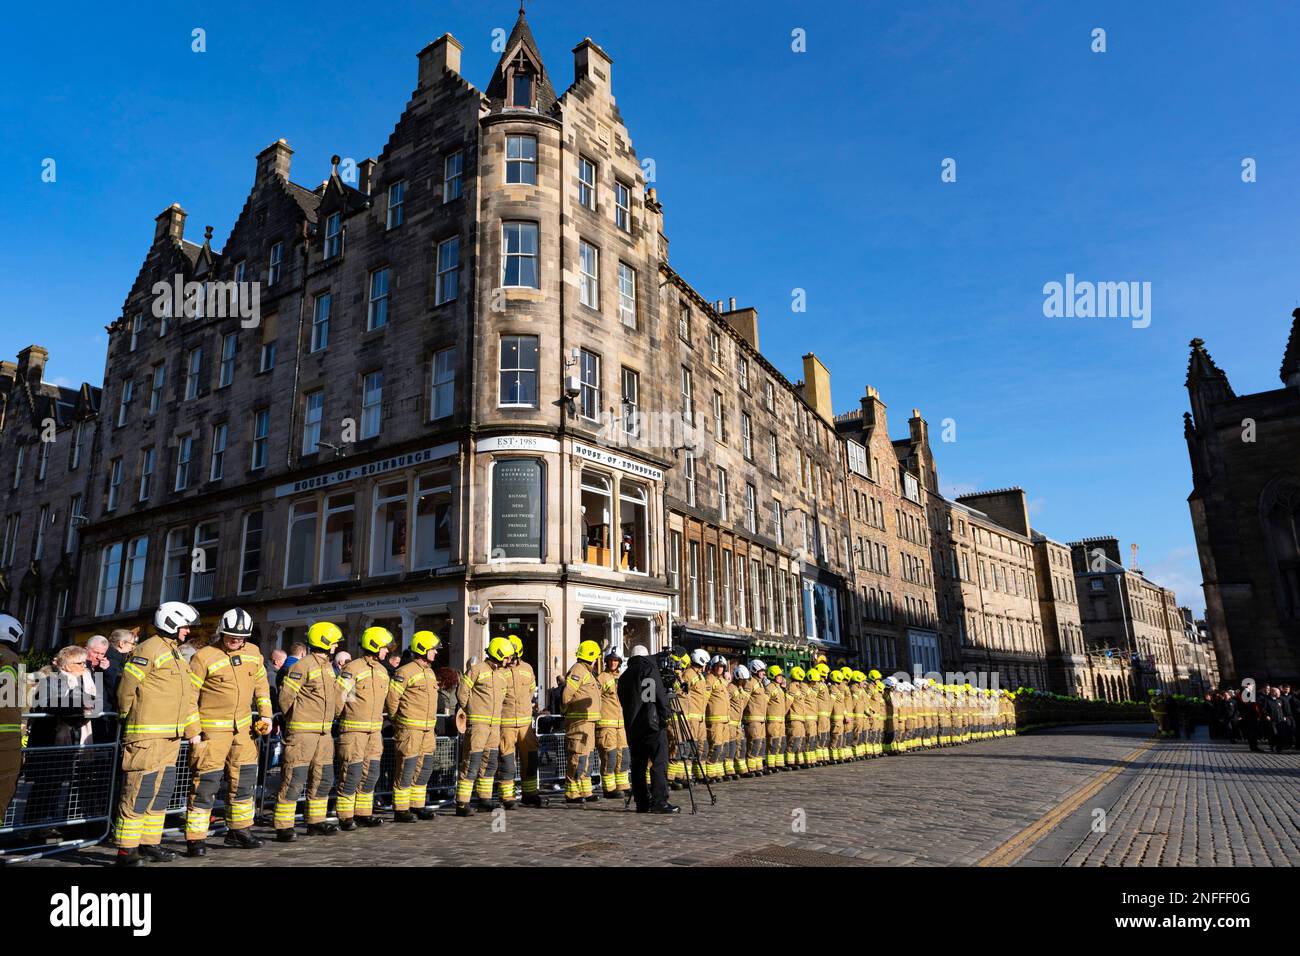 Edinburgh, Scotland, UK. 17 February 2023. The public and firefighters pay respects at funeral of firefighter Barry Martin at St Giles Cathedral on the Royal Mile in Edinburgh today. Mr Martin died following a fire at former Jenners department store which was being redeveloped at the time of the fire. Firefighters line the Royal Mile awaiting funeral cortege.  Iain Masterton/Alamy Live News Stock Photo